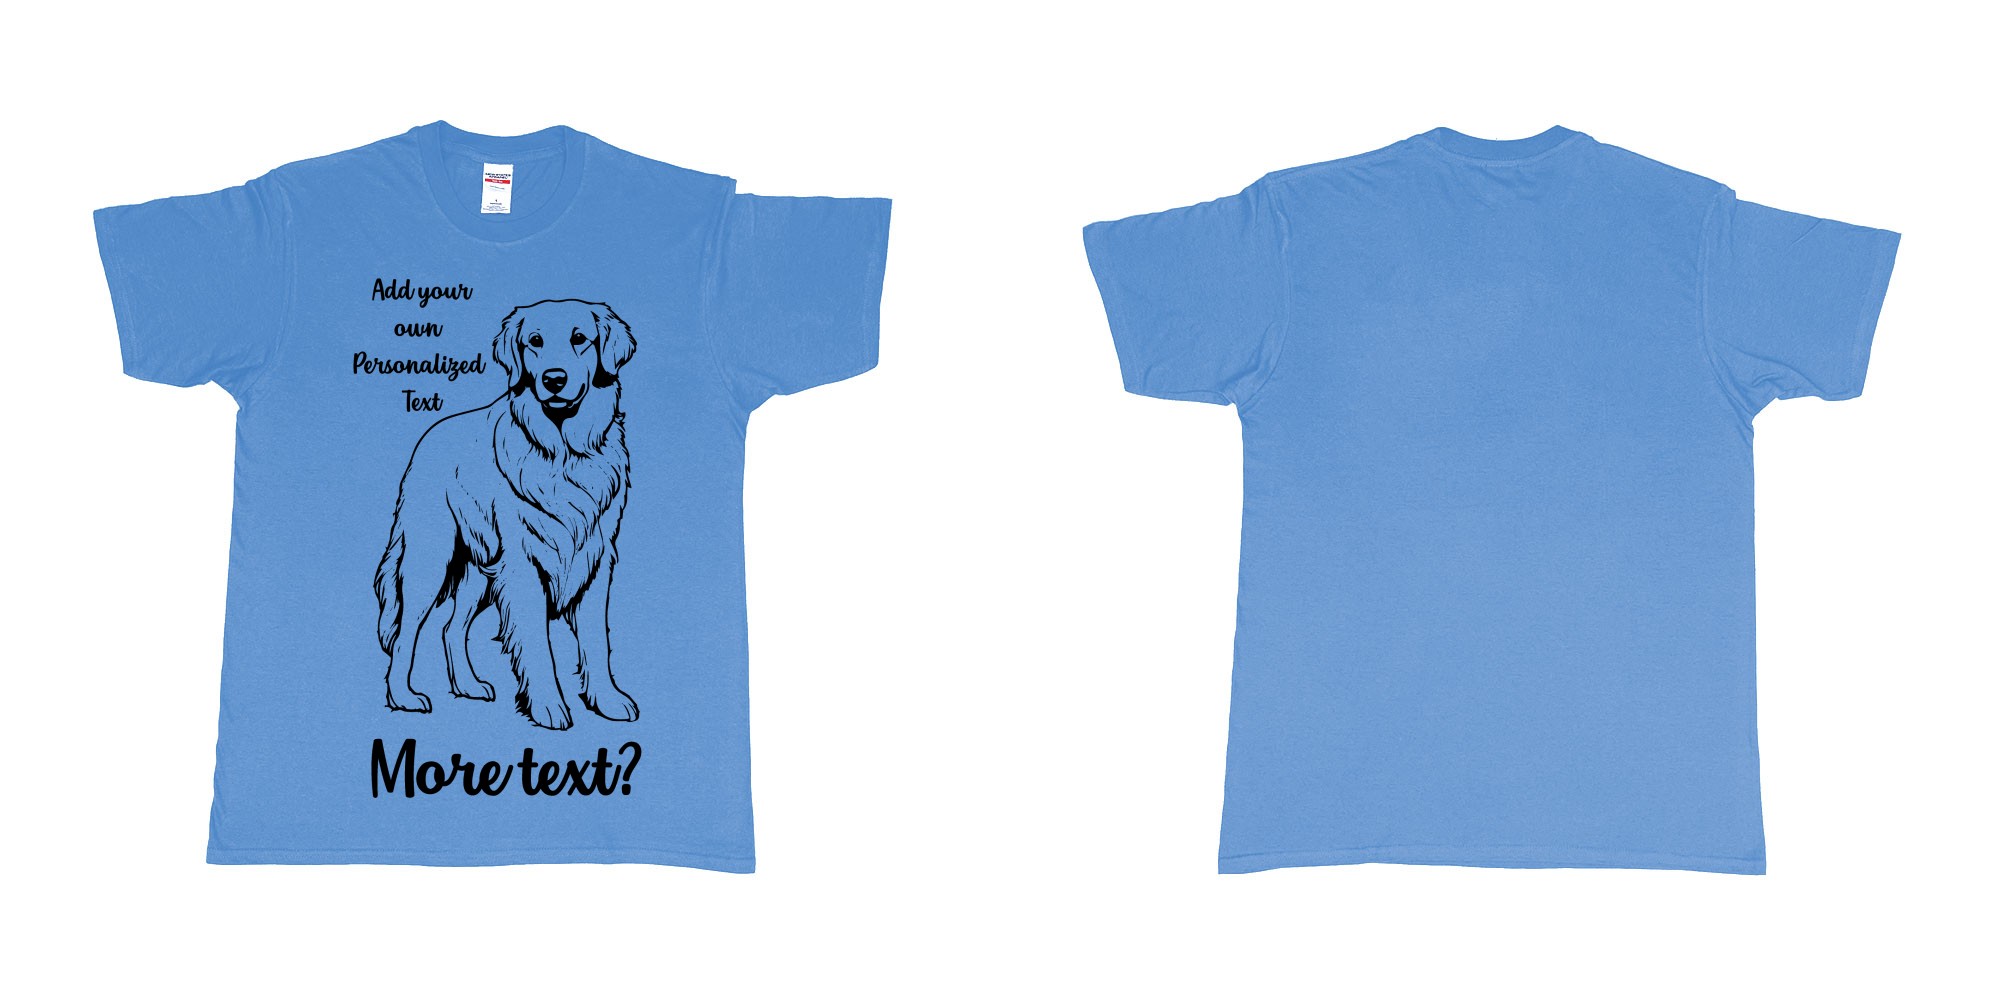 Custom tshirt design golden retriever dog breed personalized text in fabric color carolina-blue choice your own text made in Bali by The Pirate Way